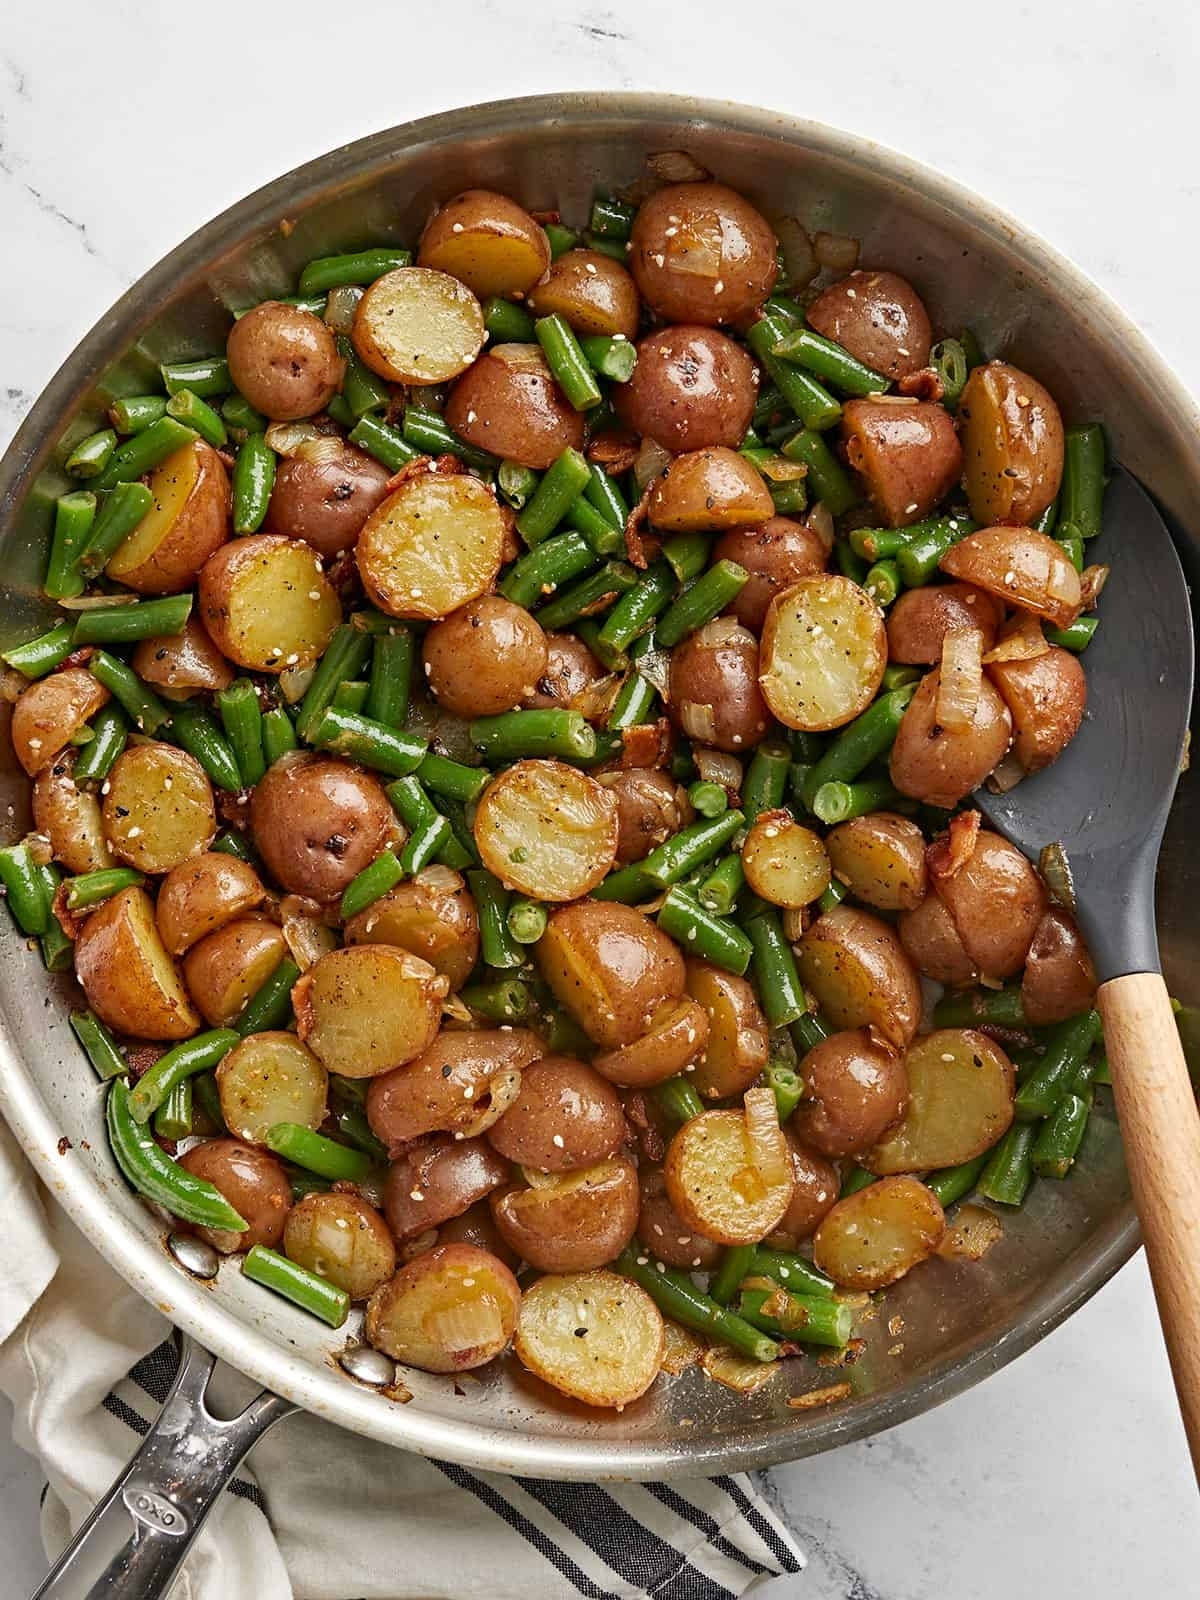 Cooked green beans and halved potatoes in a pan